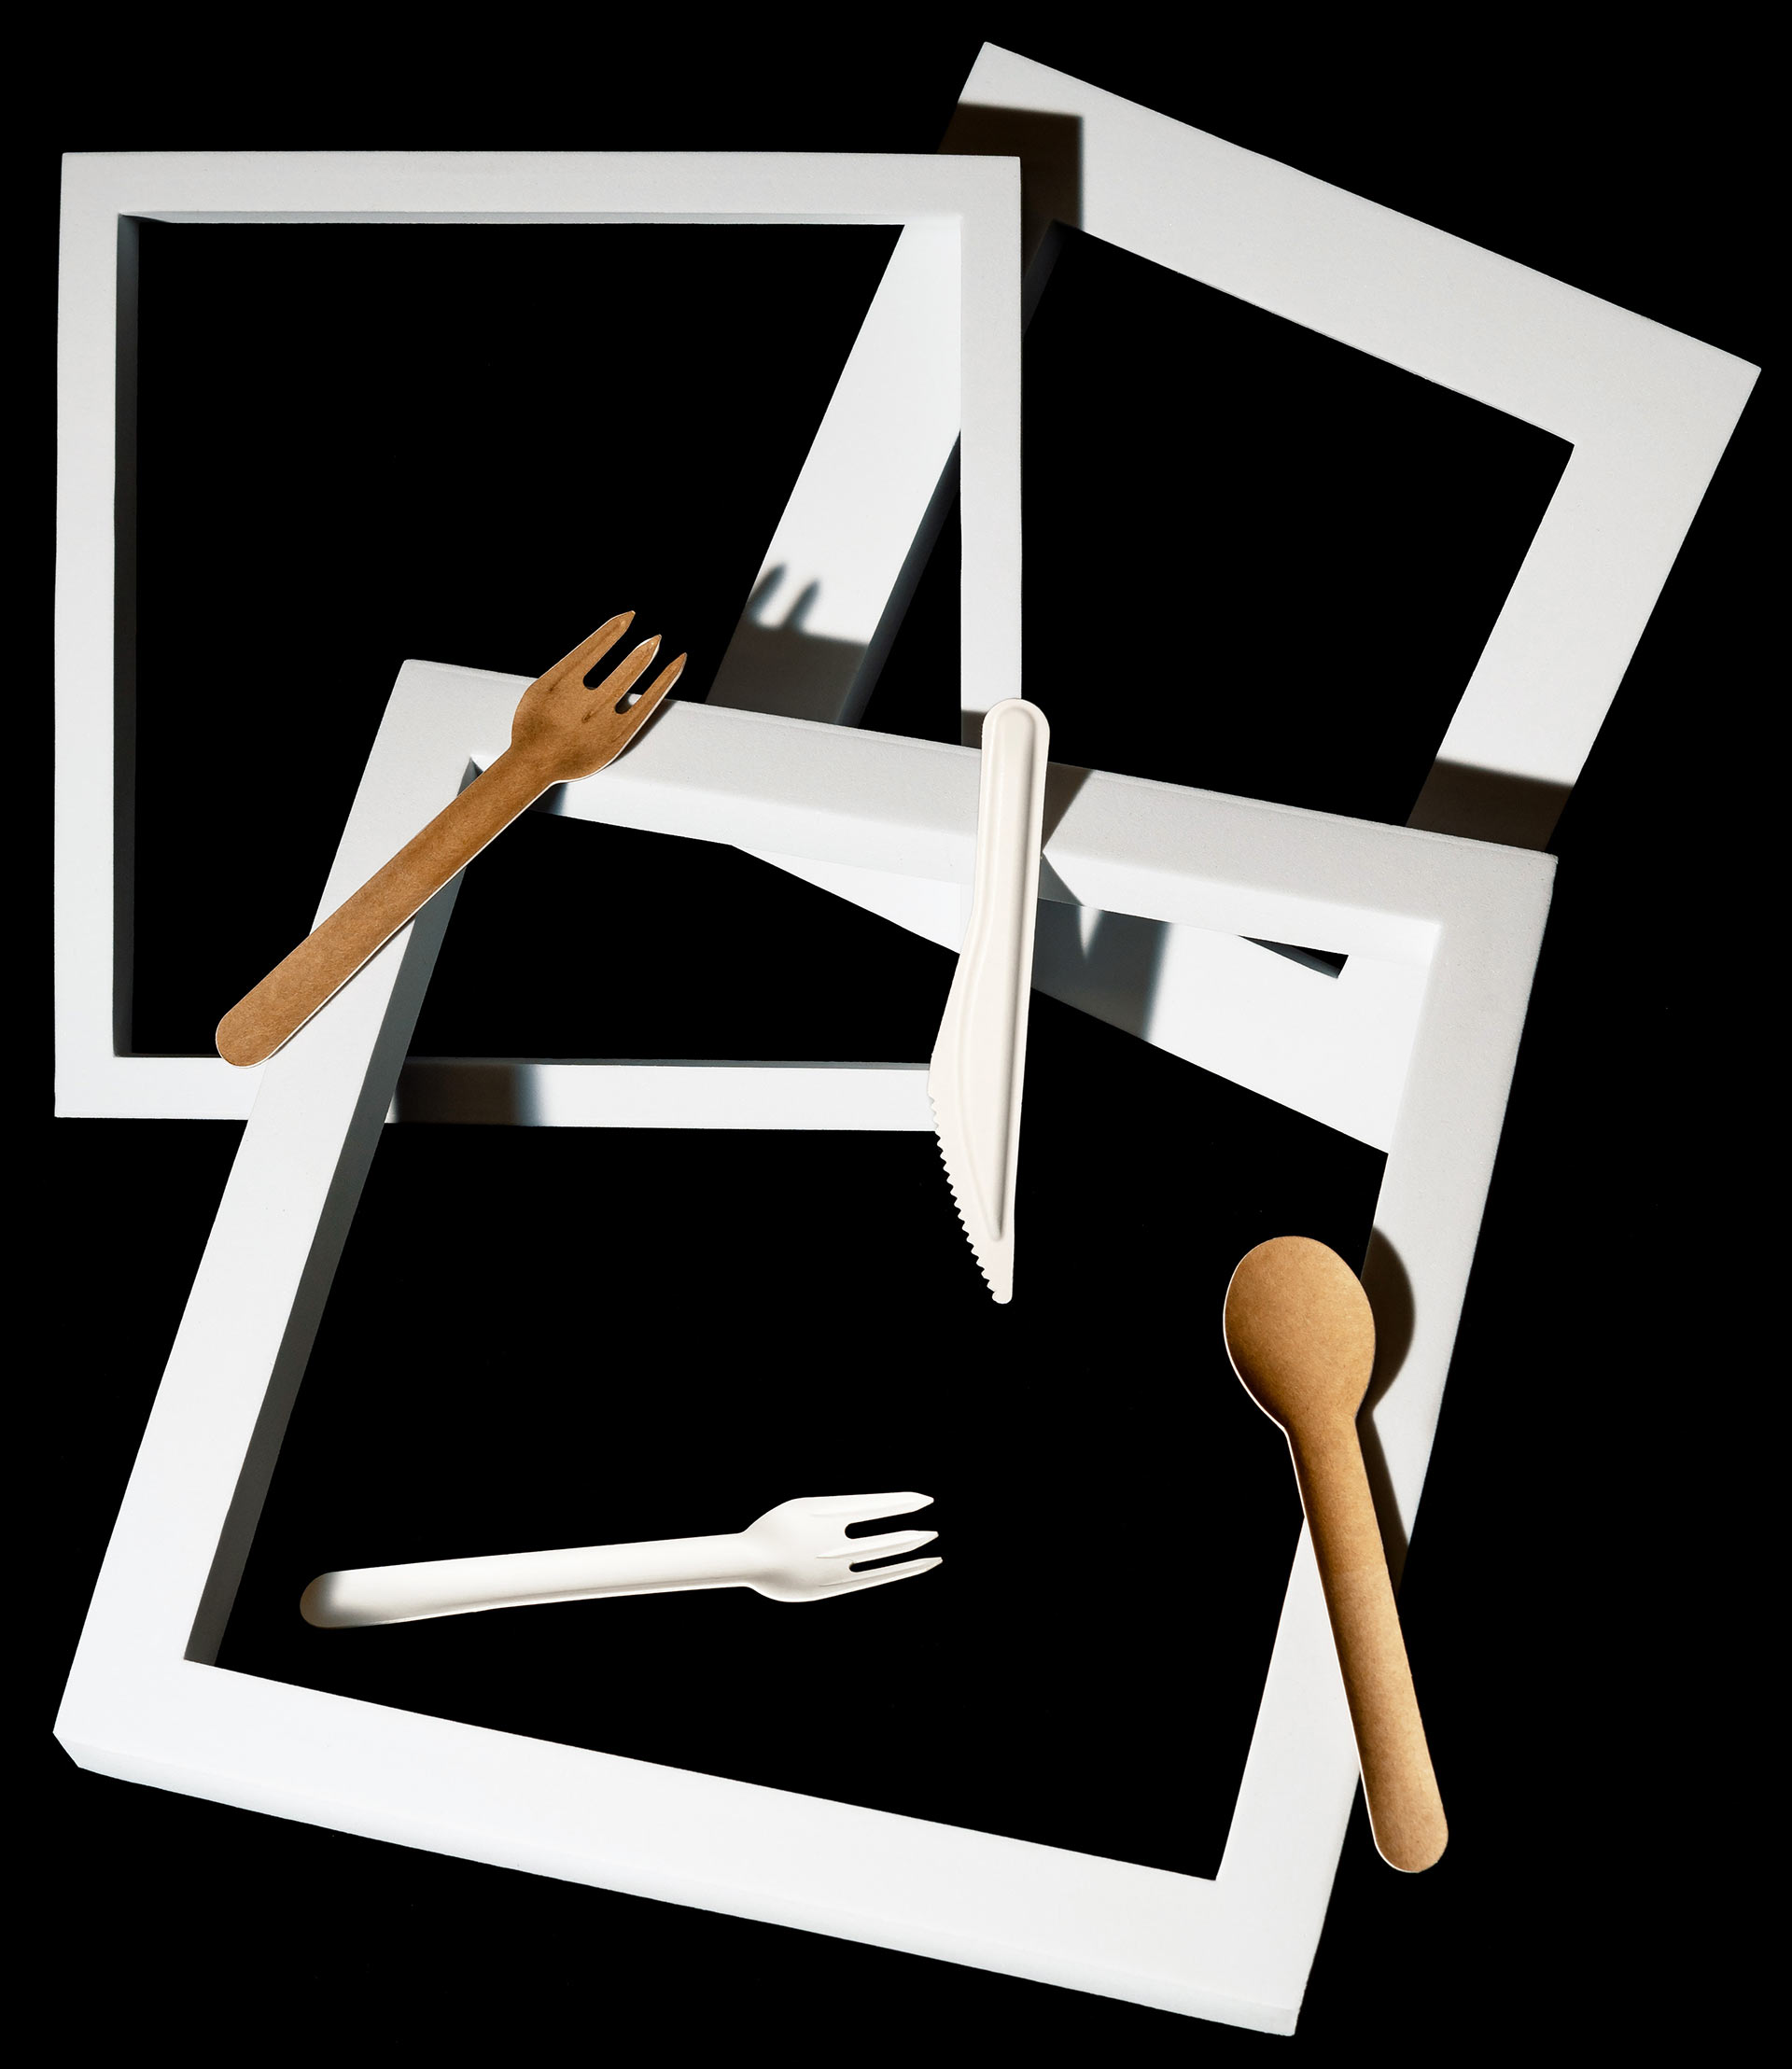 Paper forks and spoons on a black background with white squares